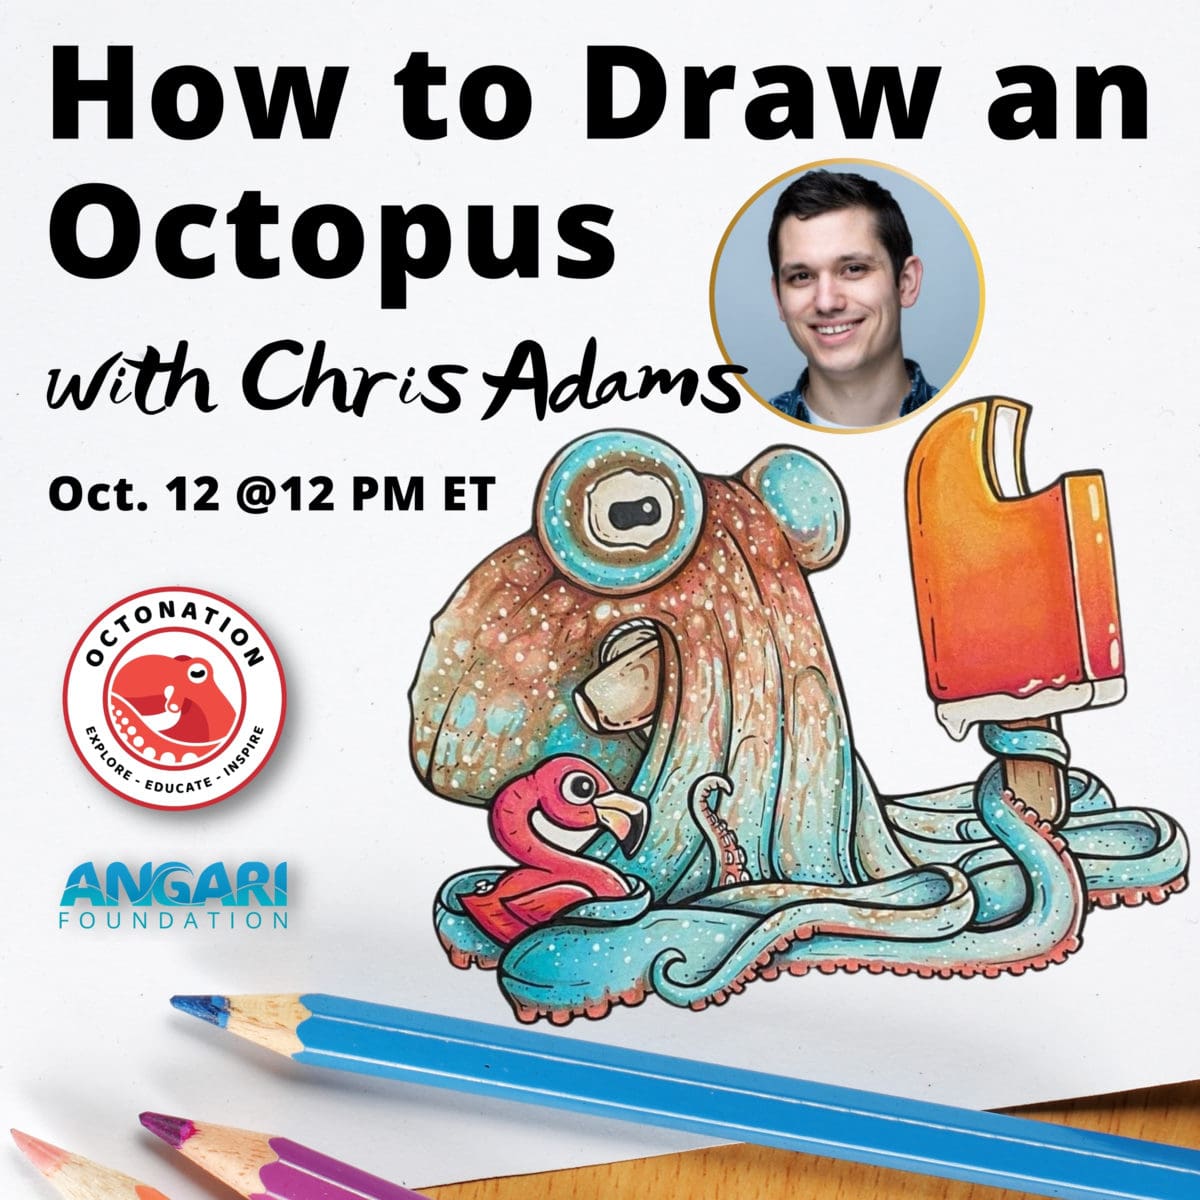 How to Draw an Octopus Event with OctoNation